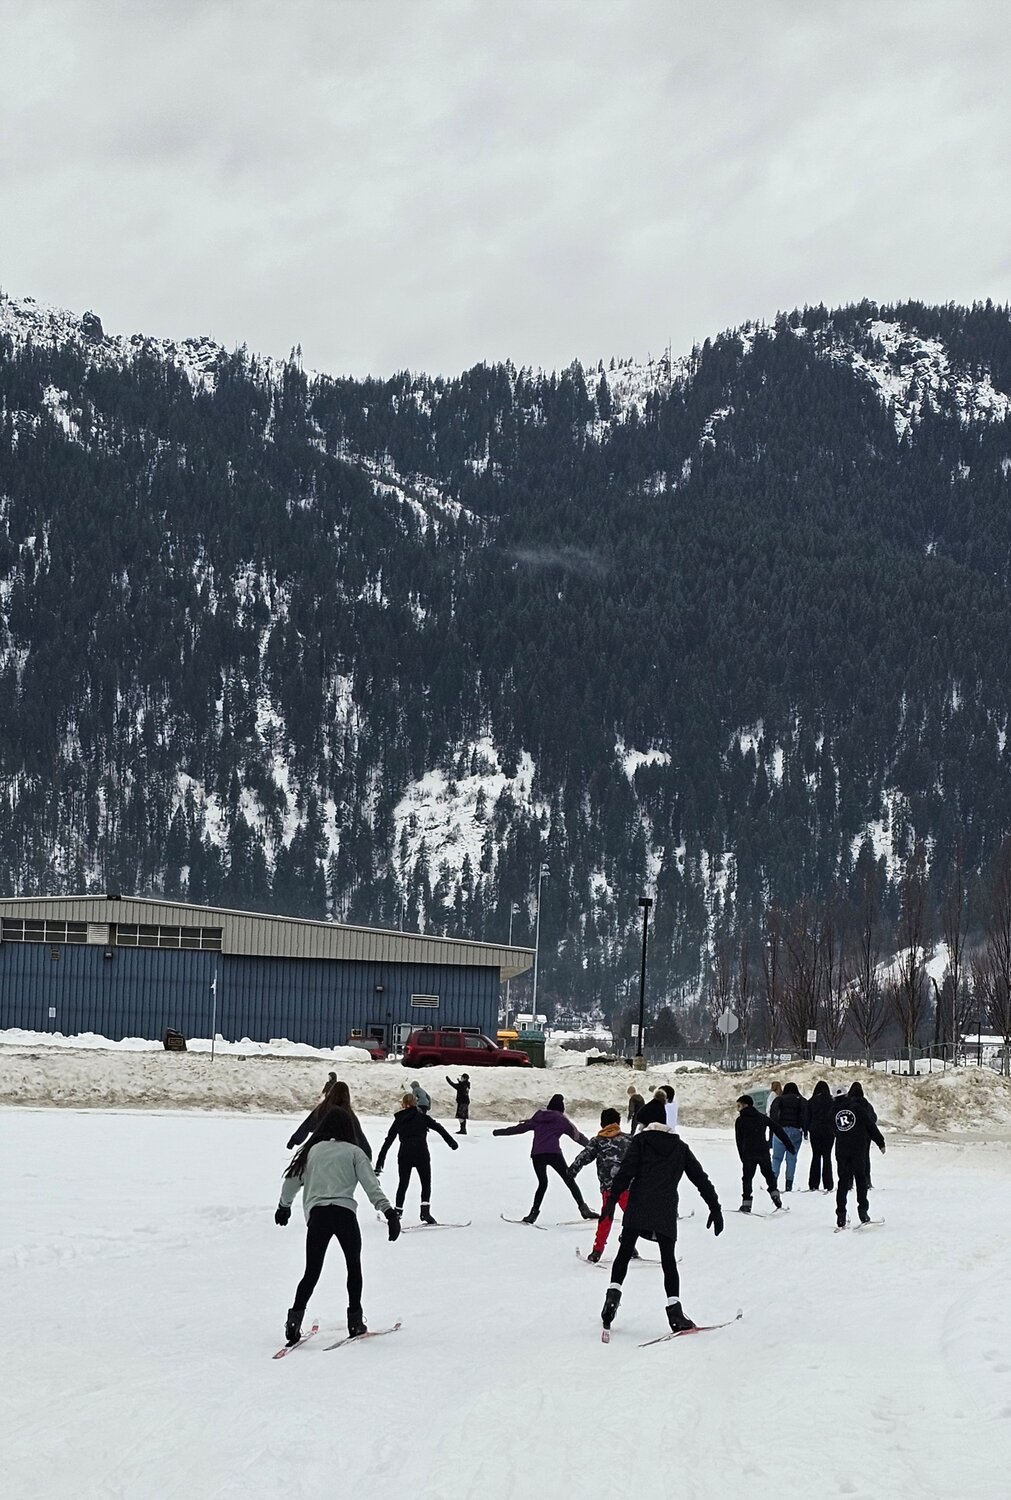 Students ski during their P.E. class on a ski track groomed by Leavenworth Winter Sports Club.